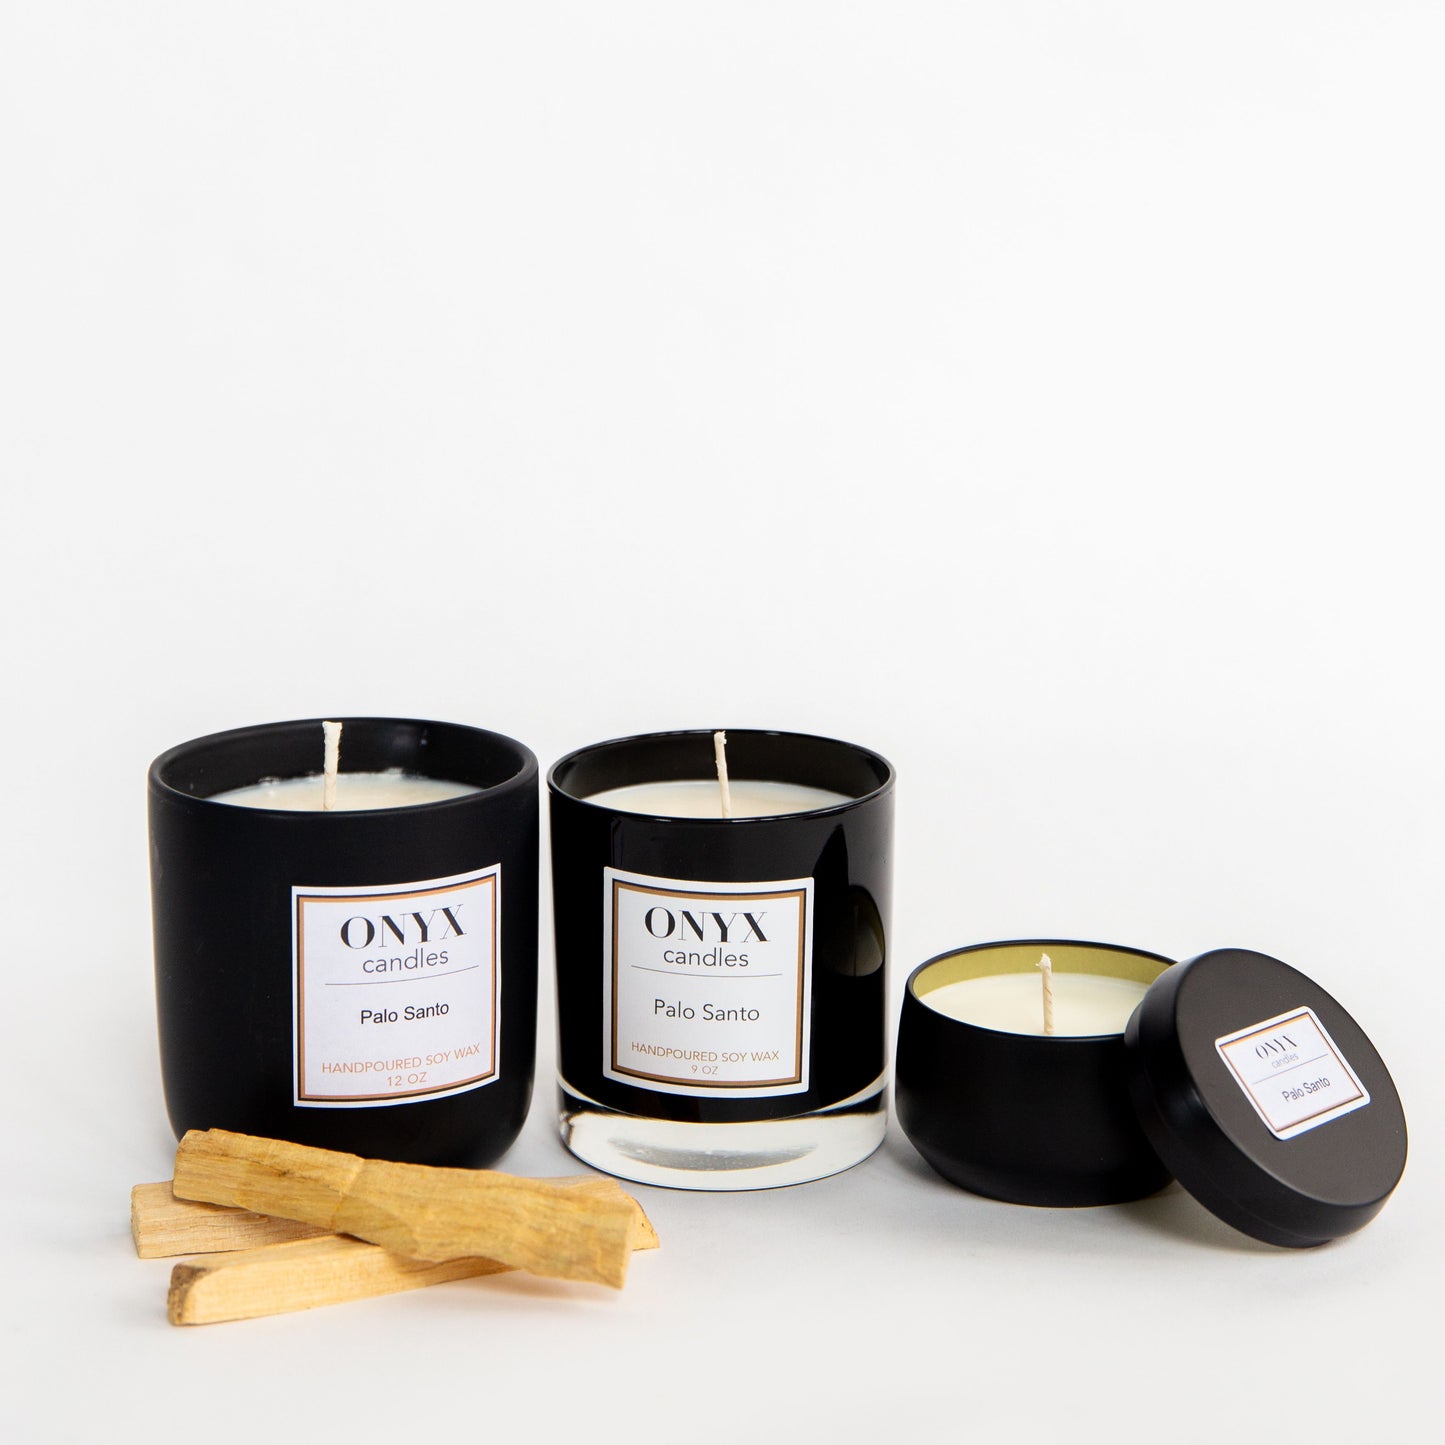 Palo Santo scented candle collection by Onyx Candles. Shown here are three variants, from let to right we have the 12oz matte black ceramic jar, the 9oz black glass jar, and the 4oz matte black size varieties